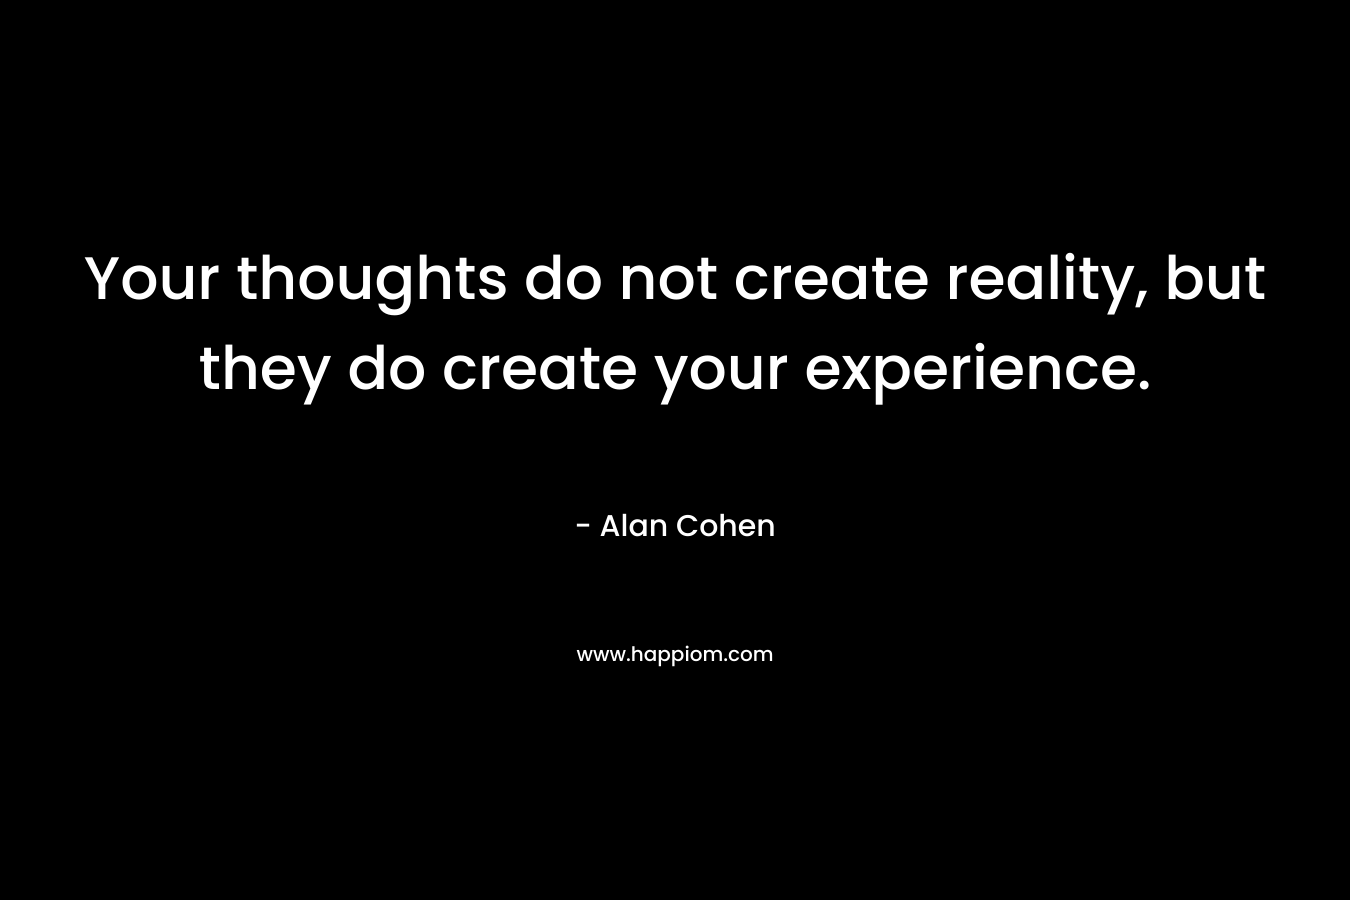 Your thoughts do not create reality, but they do create your experience.